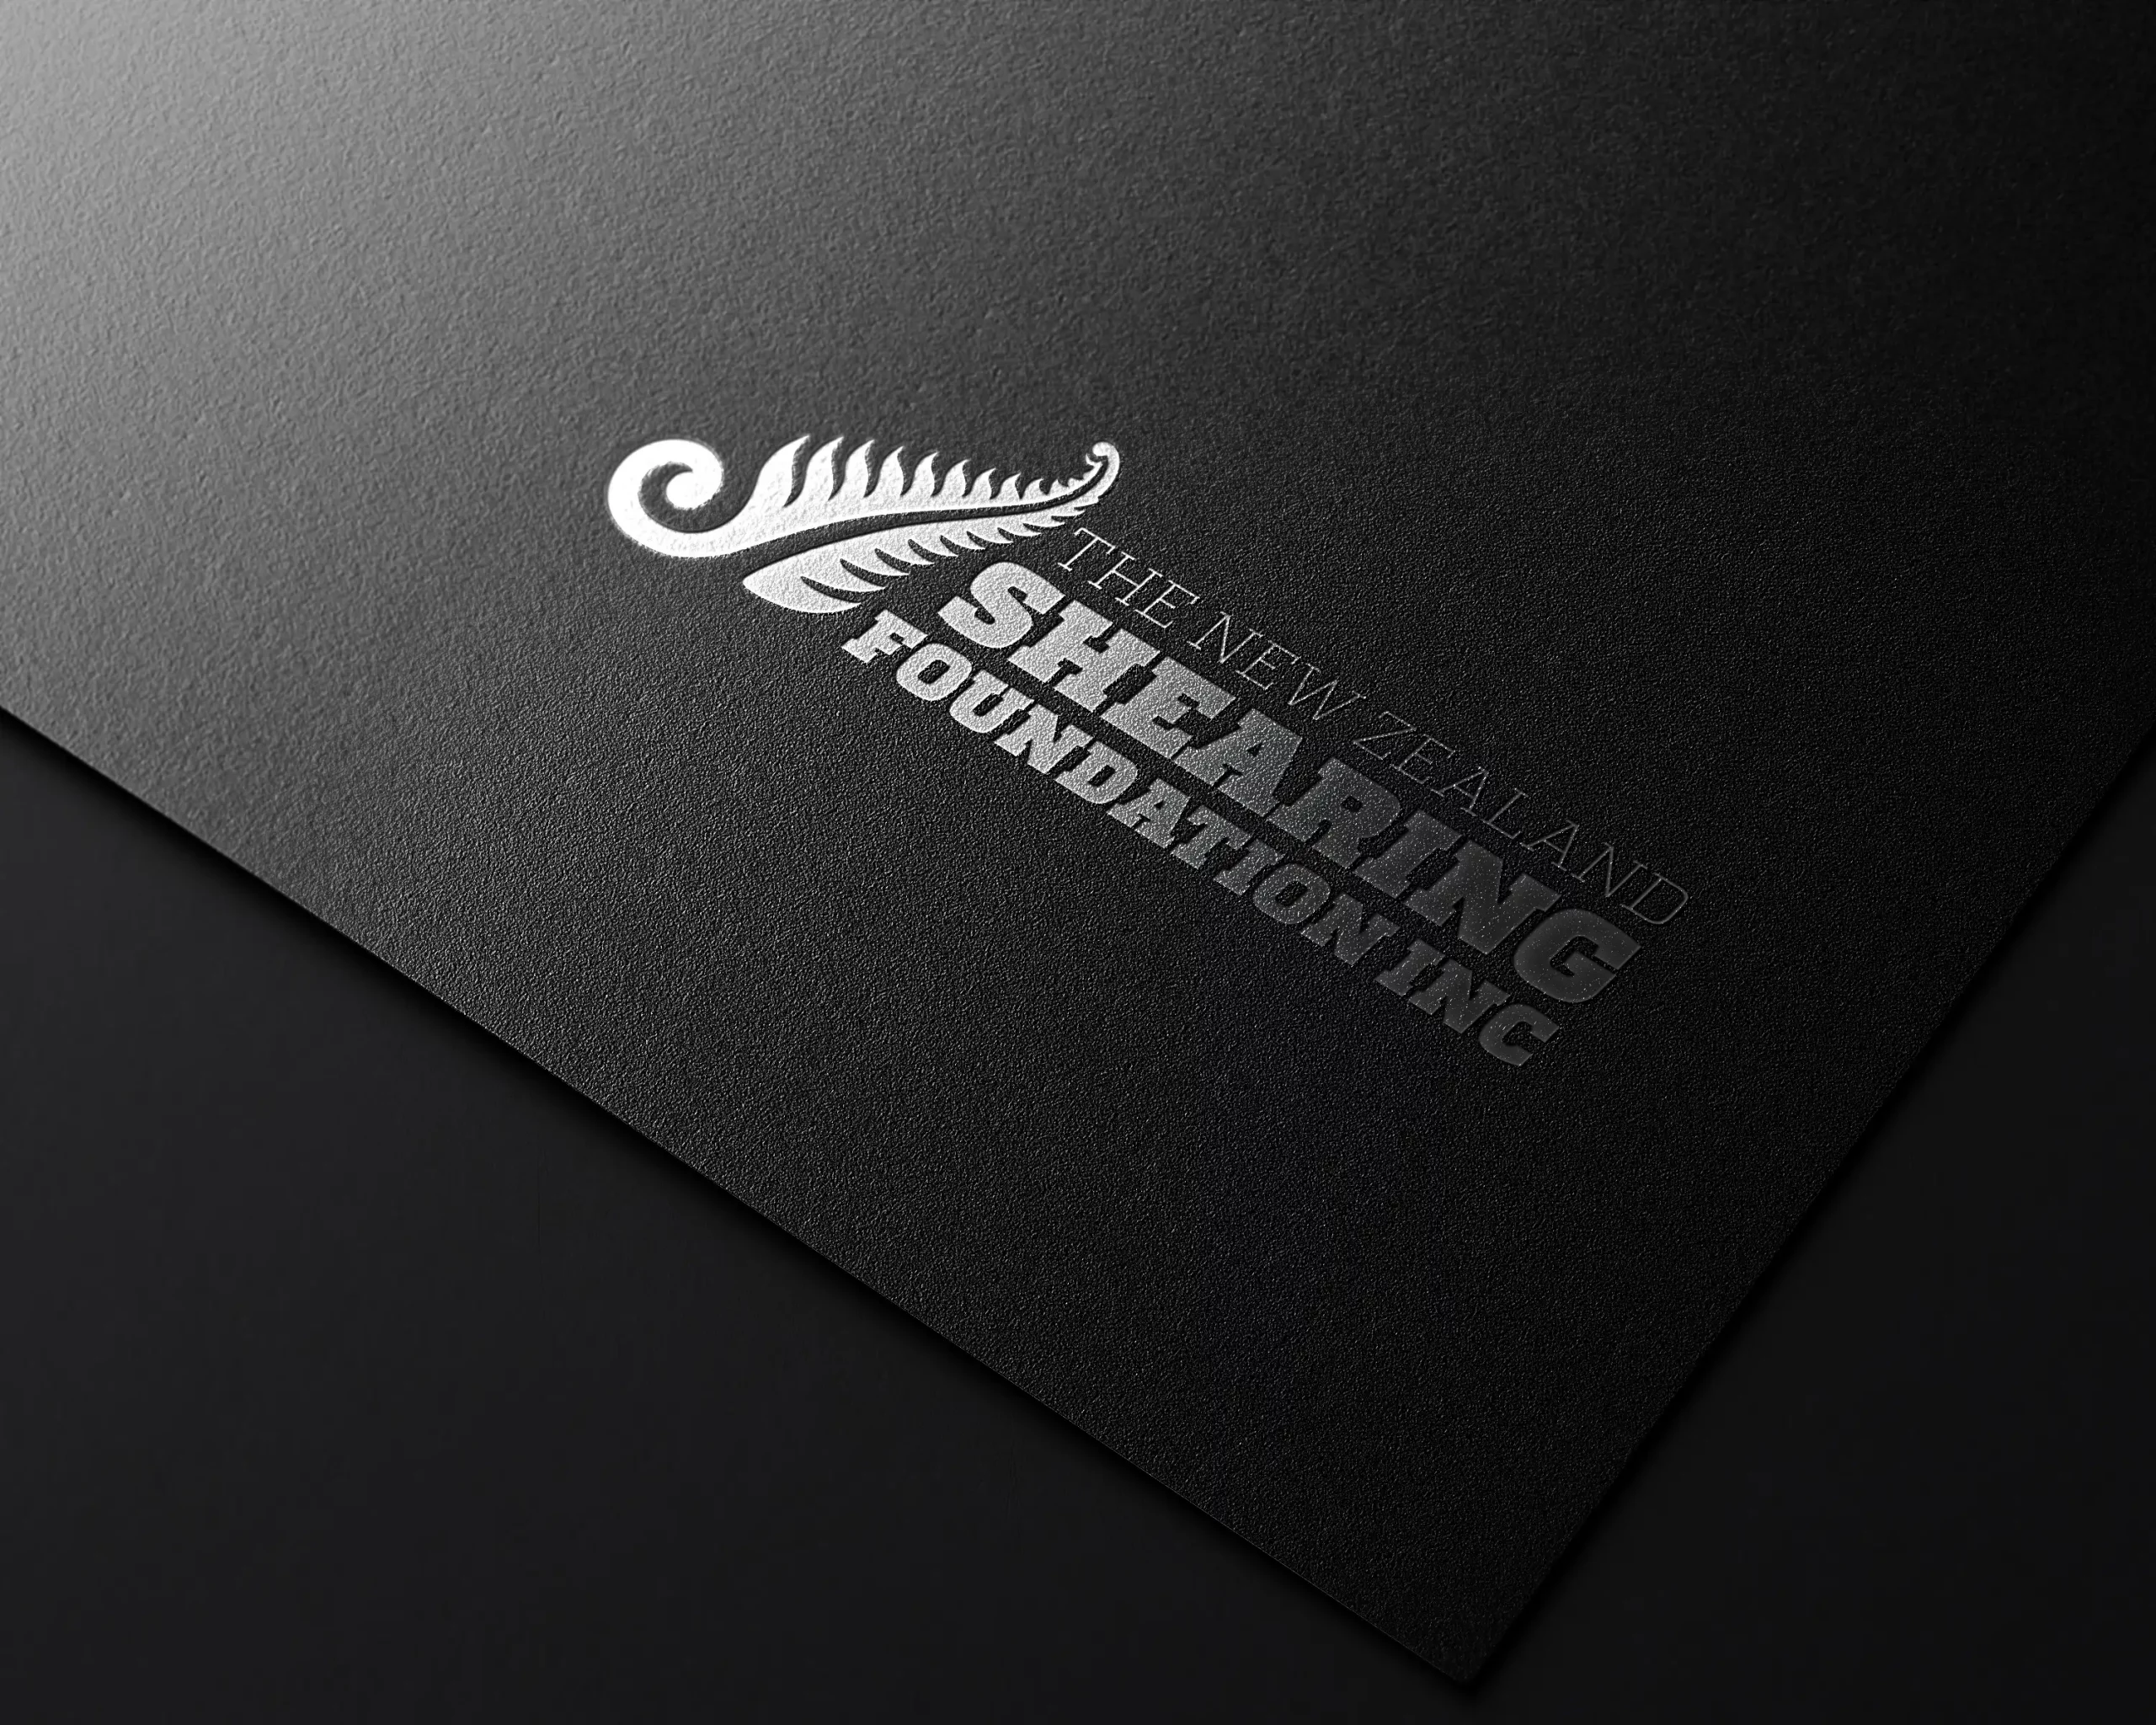 Logo Making made easy for The NZ Shearing Foundation Inc in Rolleston, Selwyn, Christchucrh, Canterbury, NZ. A international business friendly patriotic solid styled Logo Design made by XDC.NZ, the specialist Logo Designer based in Christchurch NZ